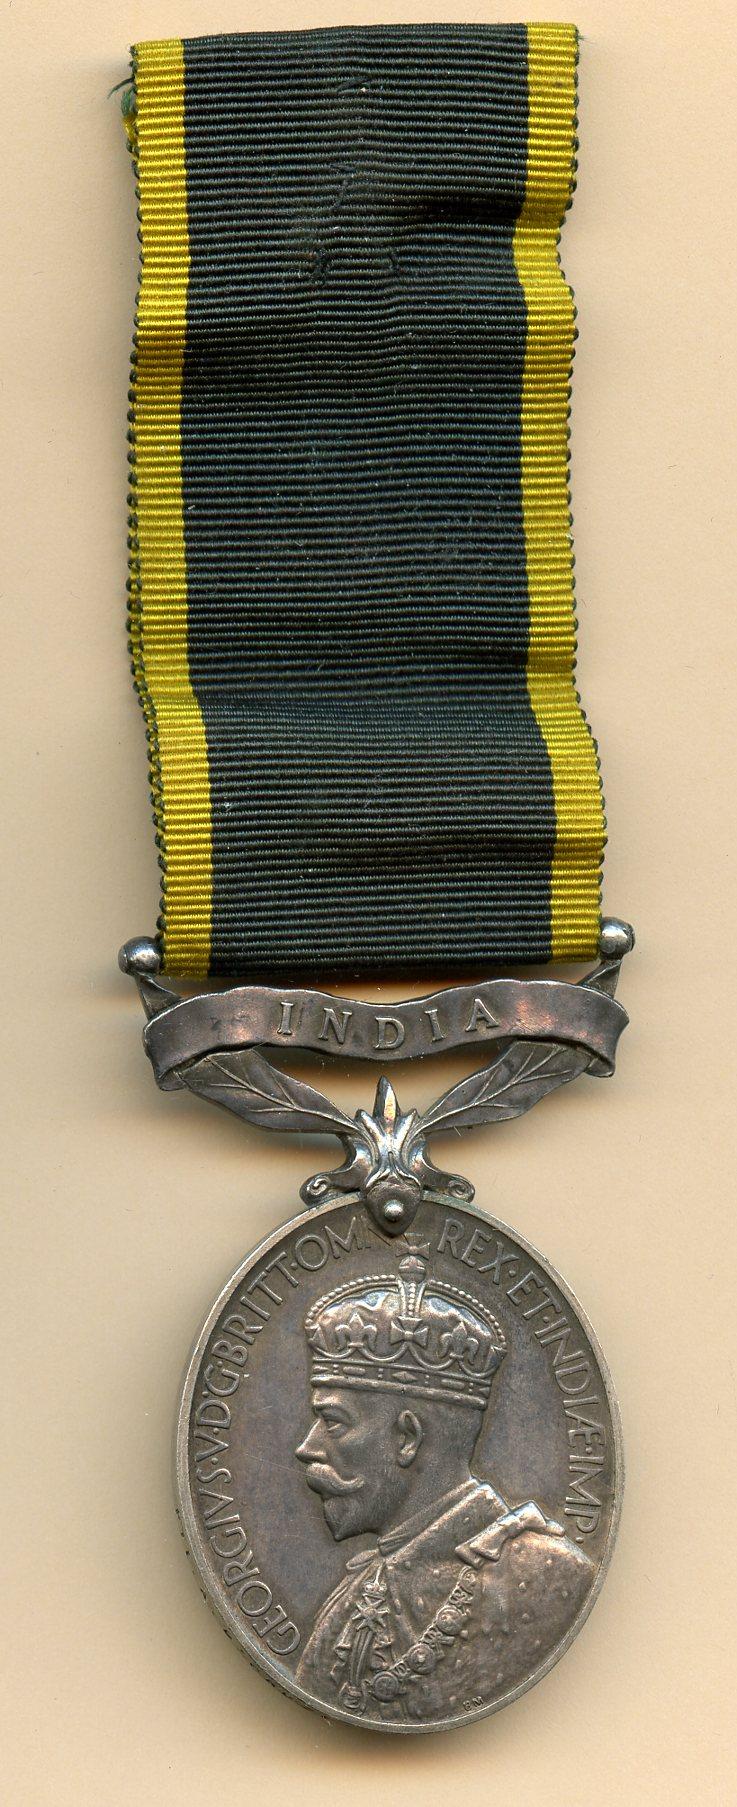 Territorial Efficiency Medal : Bar : India; Pte A. D'Cruze, The Hyderabad Rifles